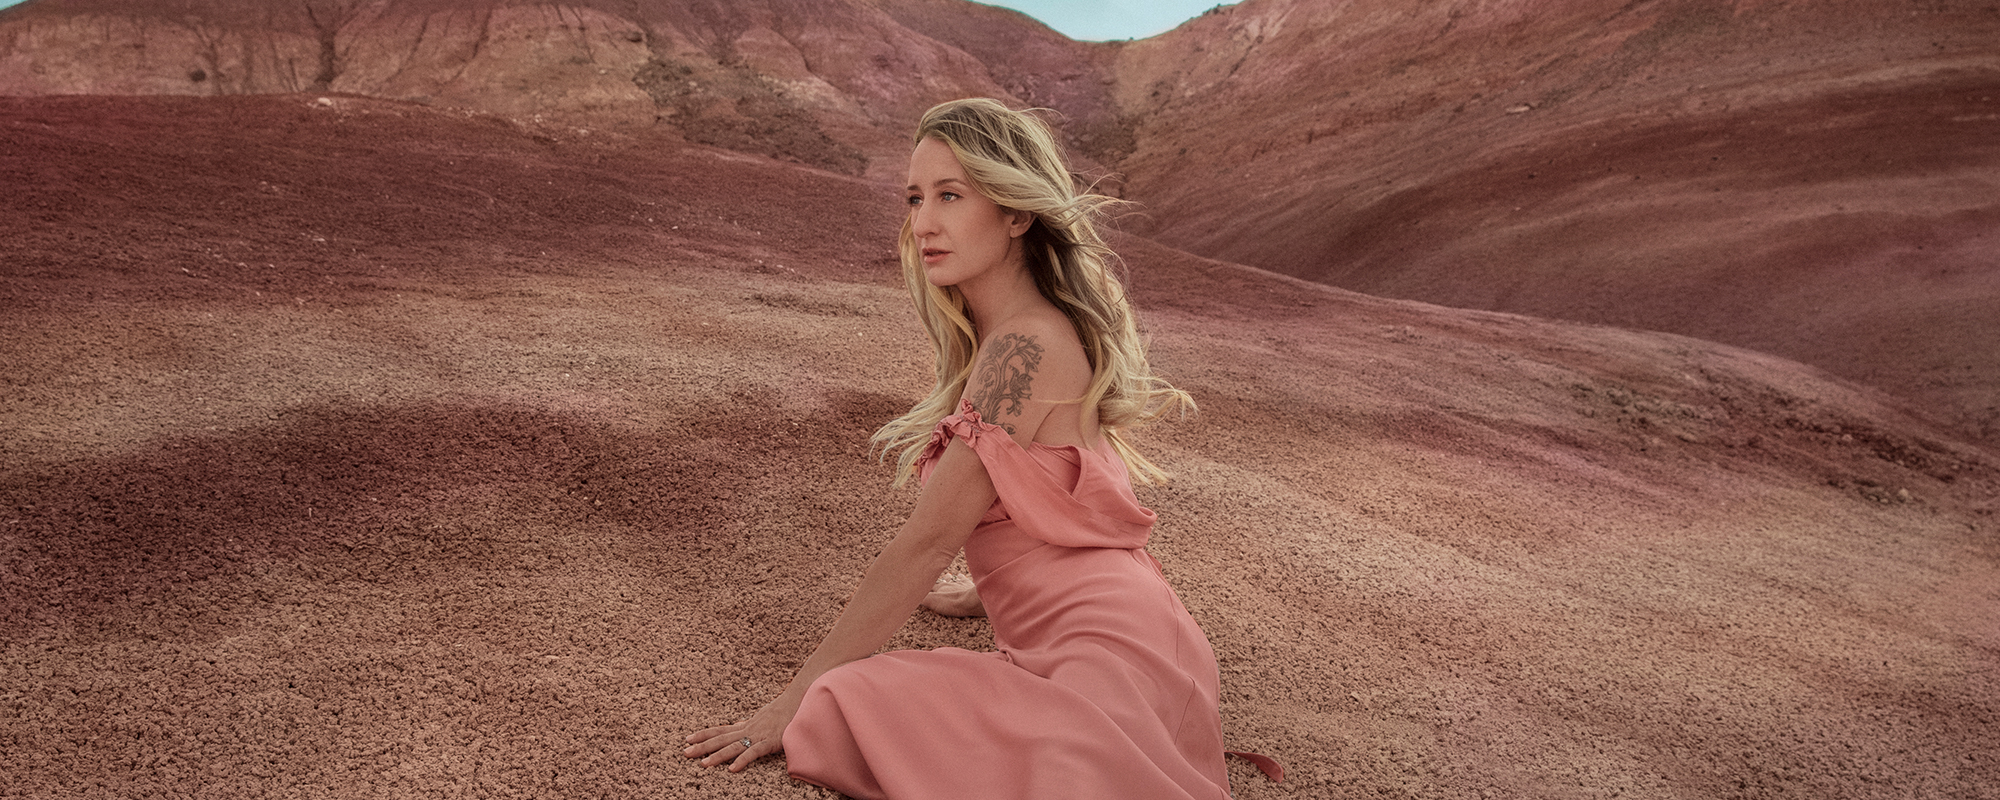 Margo Price Shares Single “Change of Heart” Ahead of New Album Release